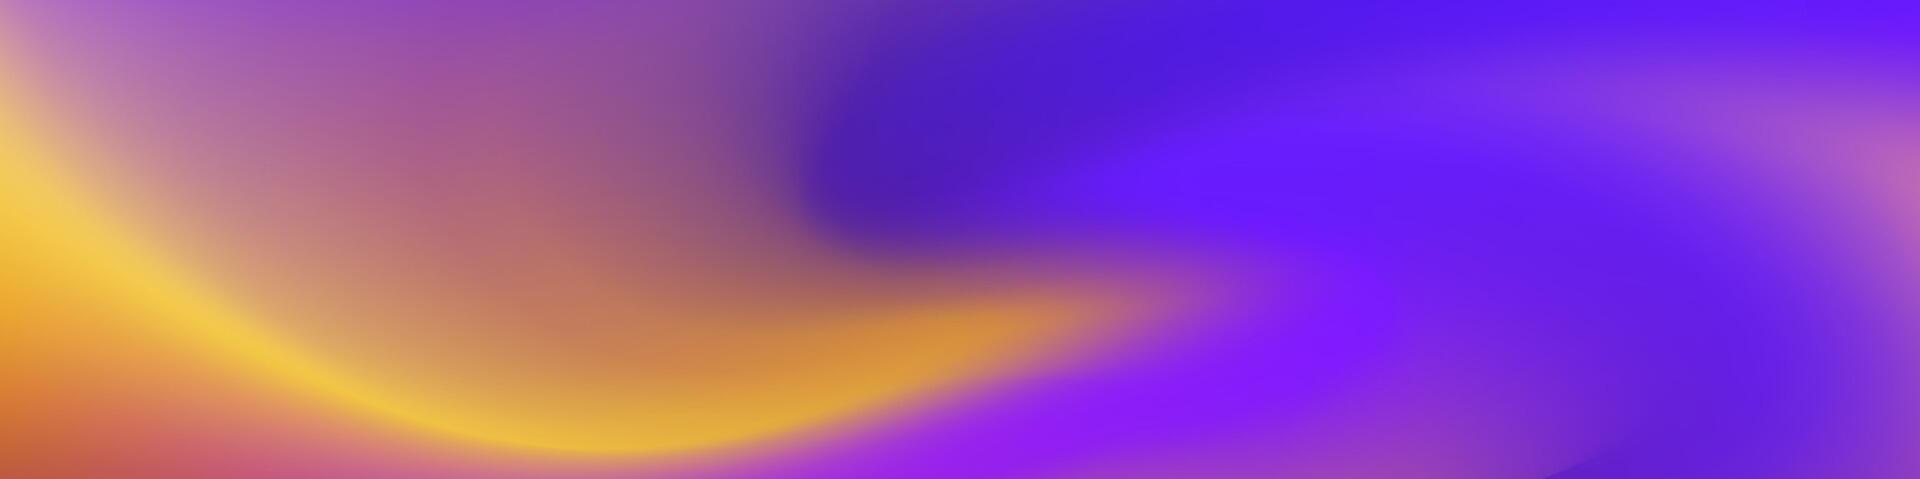 Gradient background in shades of purple and yellow. Ideal for web banners, social media posts, or any design project that requires a calming backdrop vector